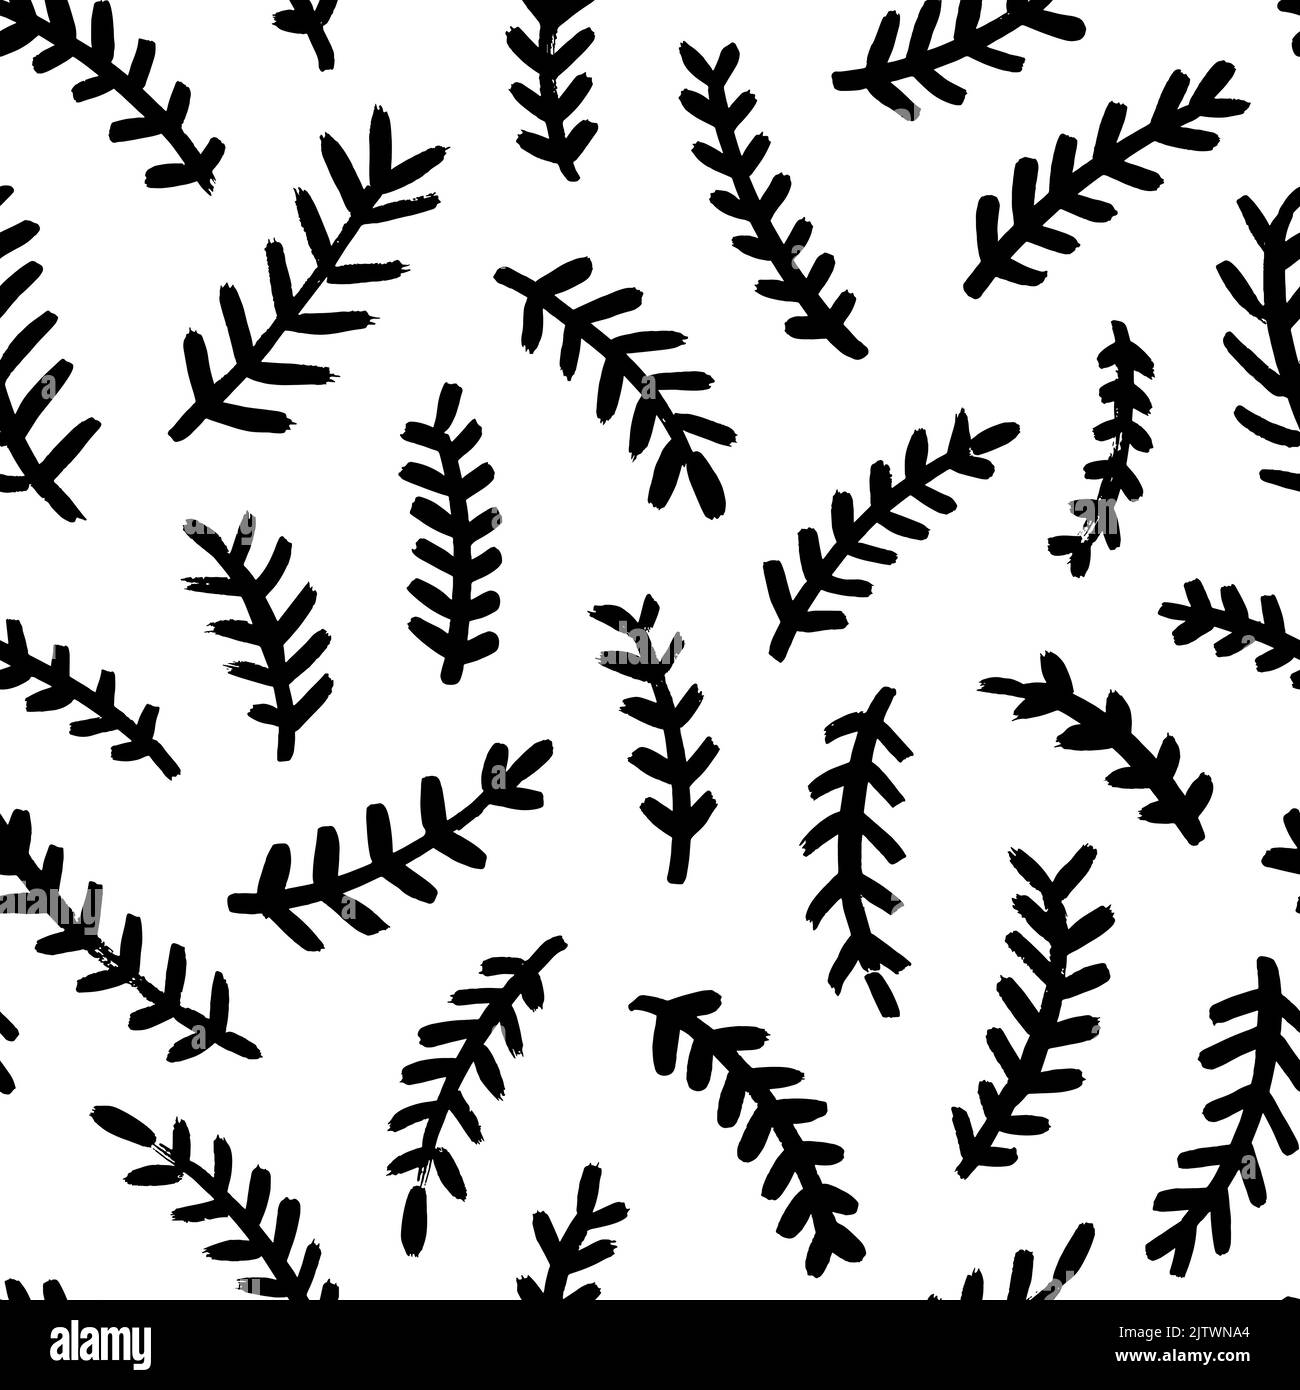 Hand drawn fir tree branches seamless pattern. Stock Vector